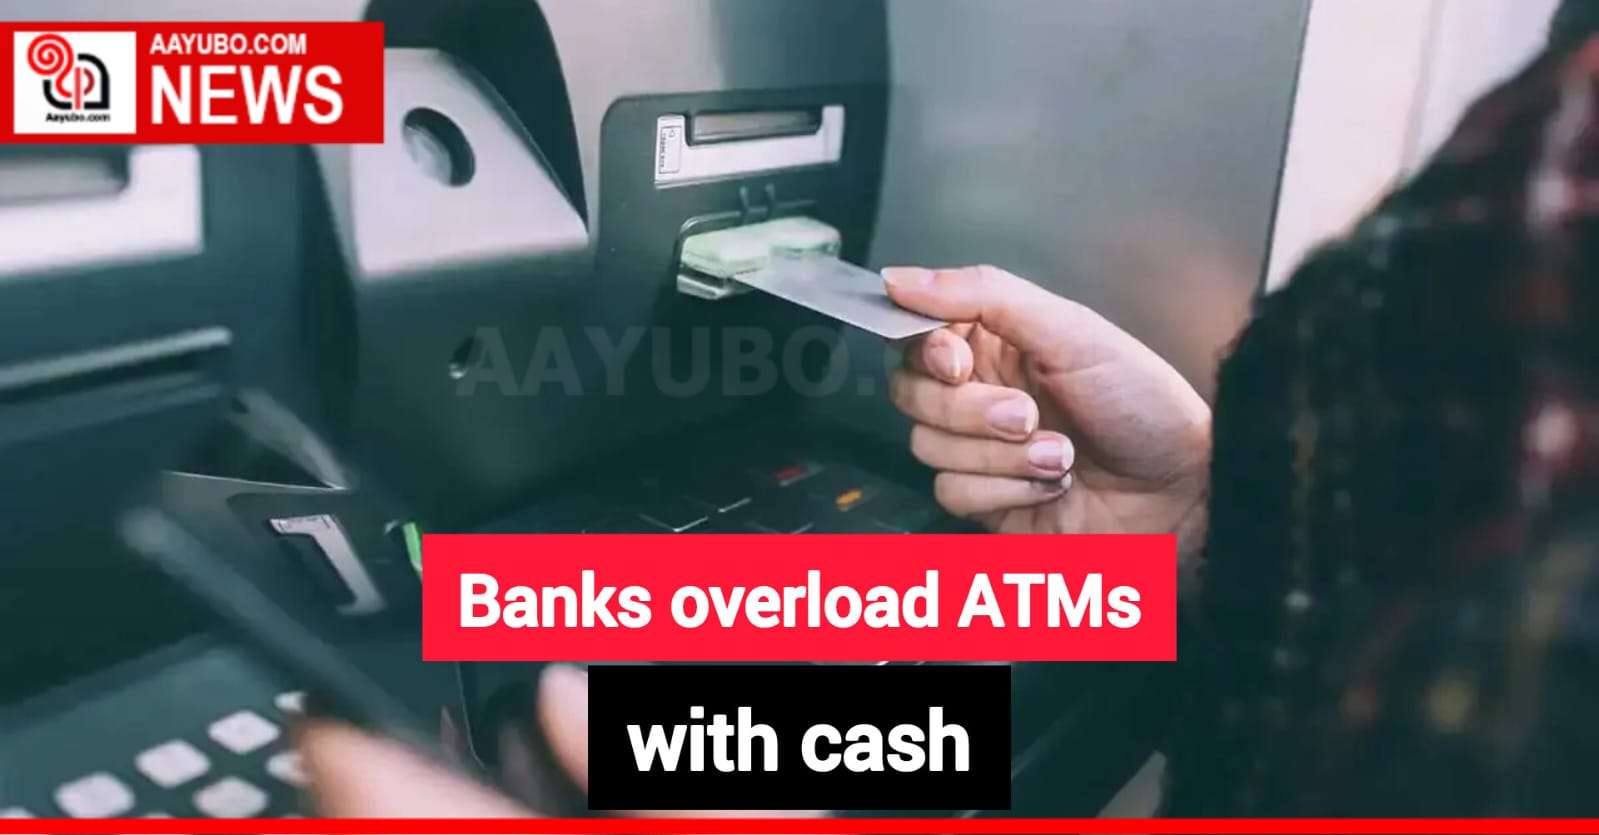 Banks overload ATMs with cash